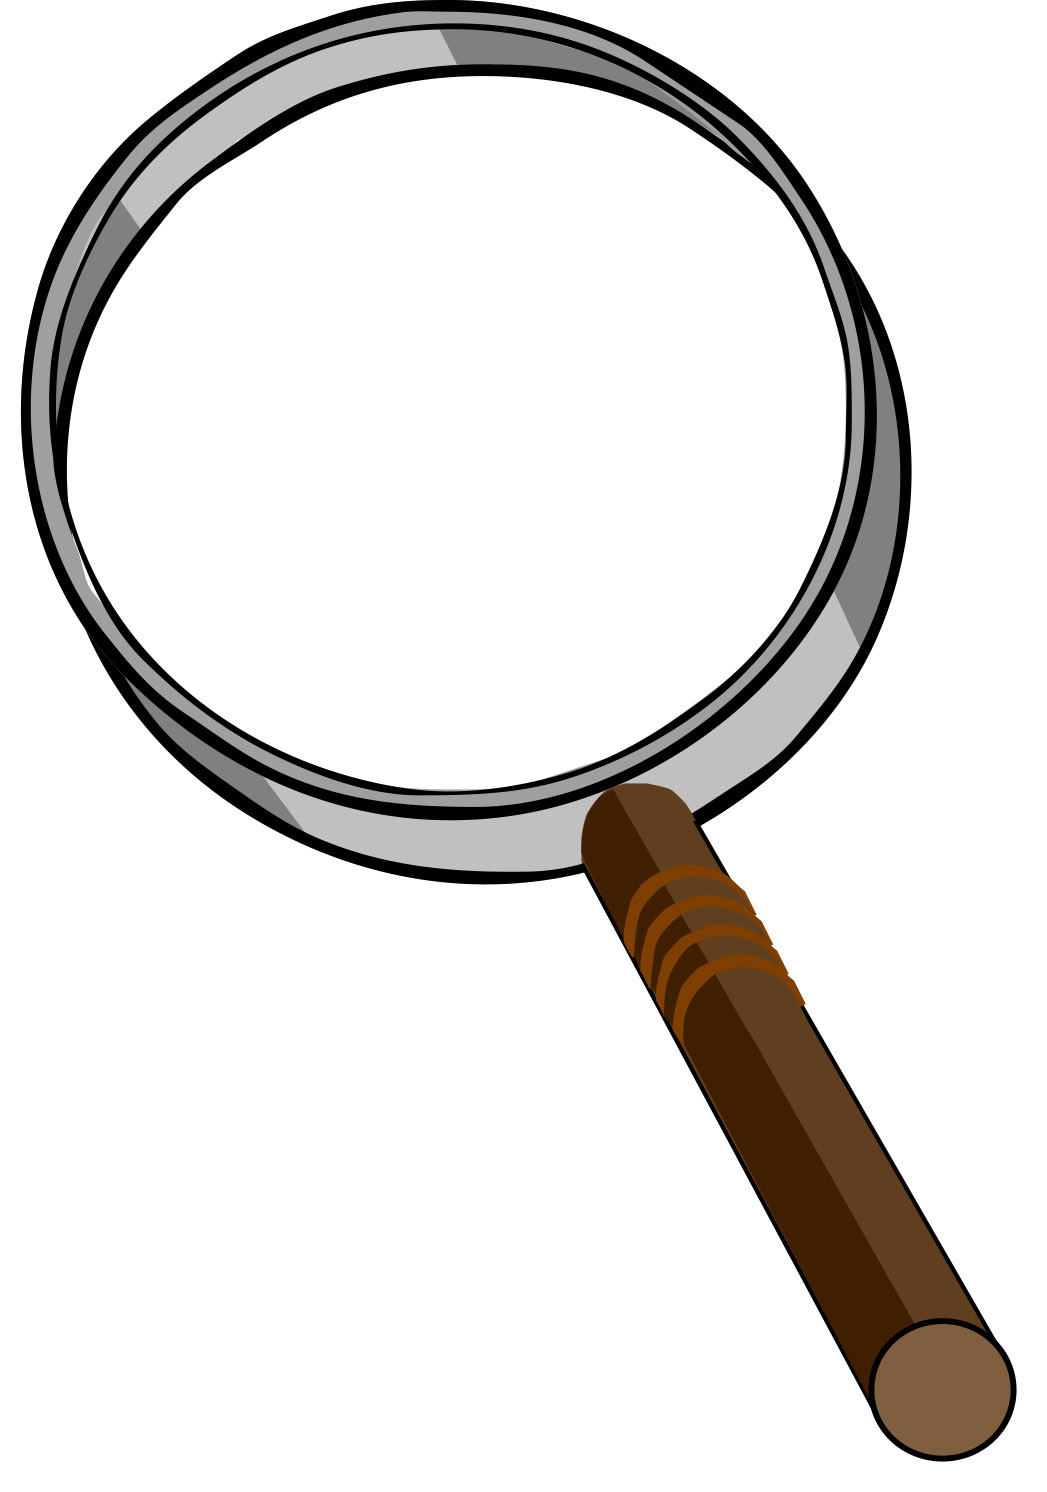 Magnifying Glass Clipart Black . Magnifying glass magnifier .